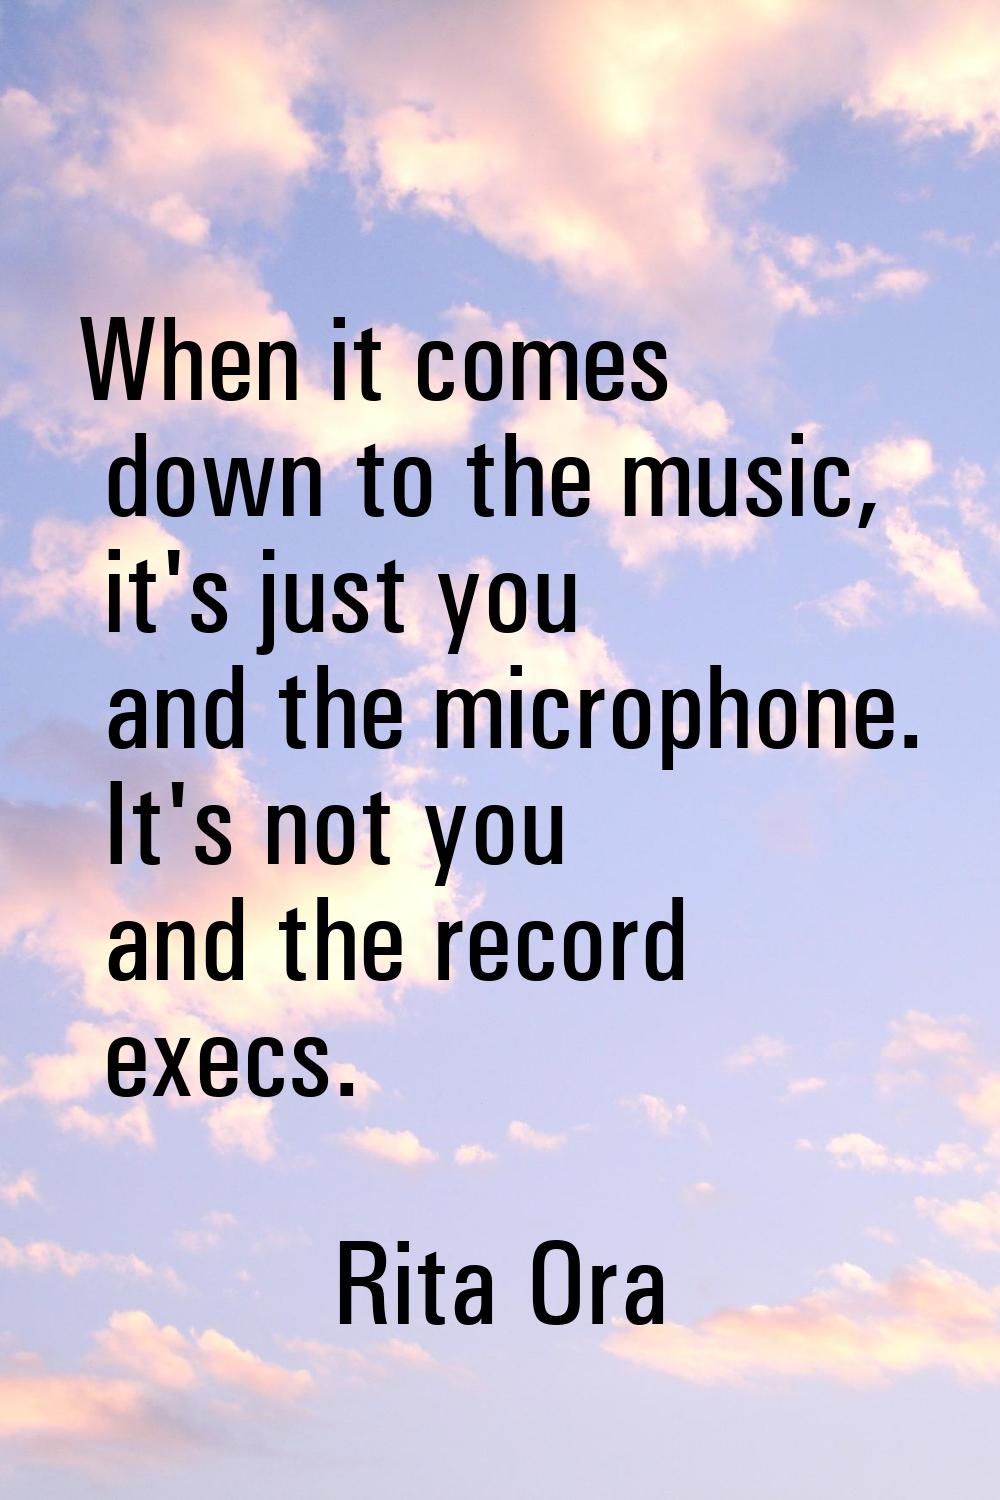 When it comes down to the music, it's just you and the microphone. It's not you and the record exec